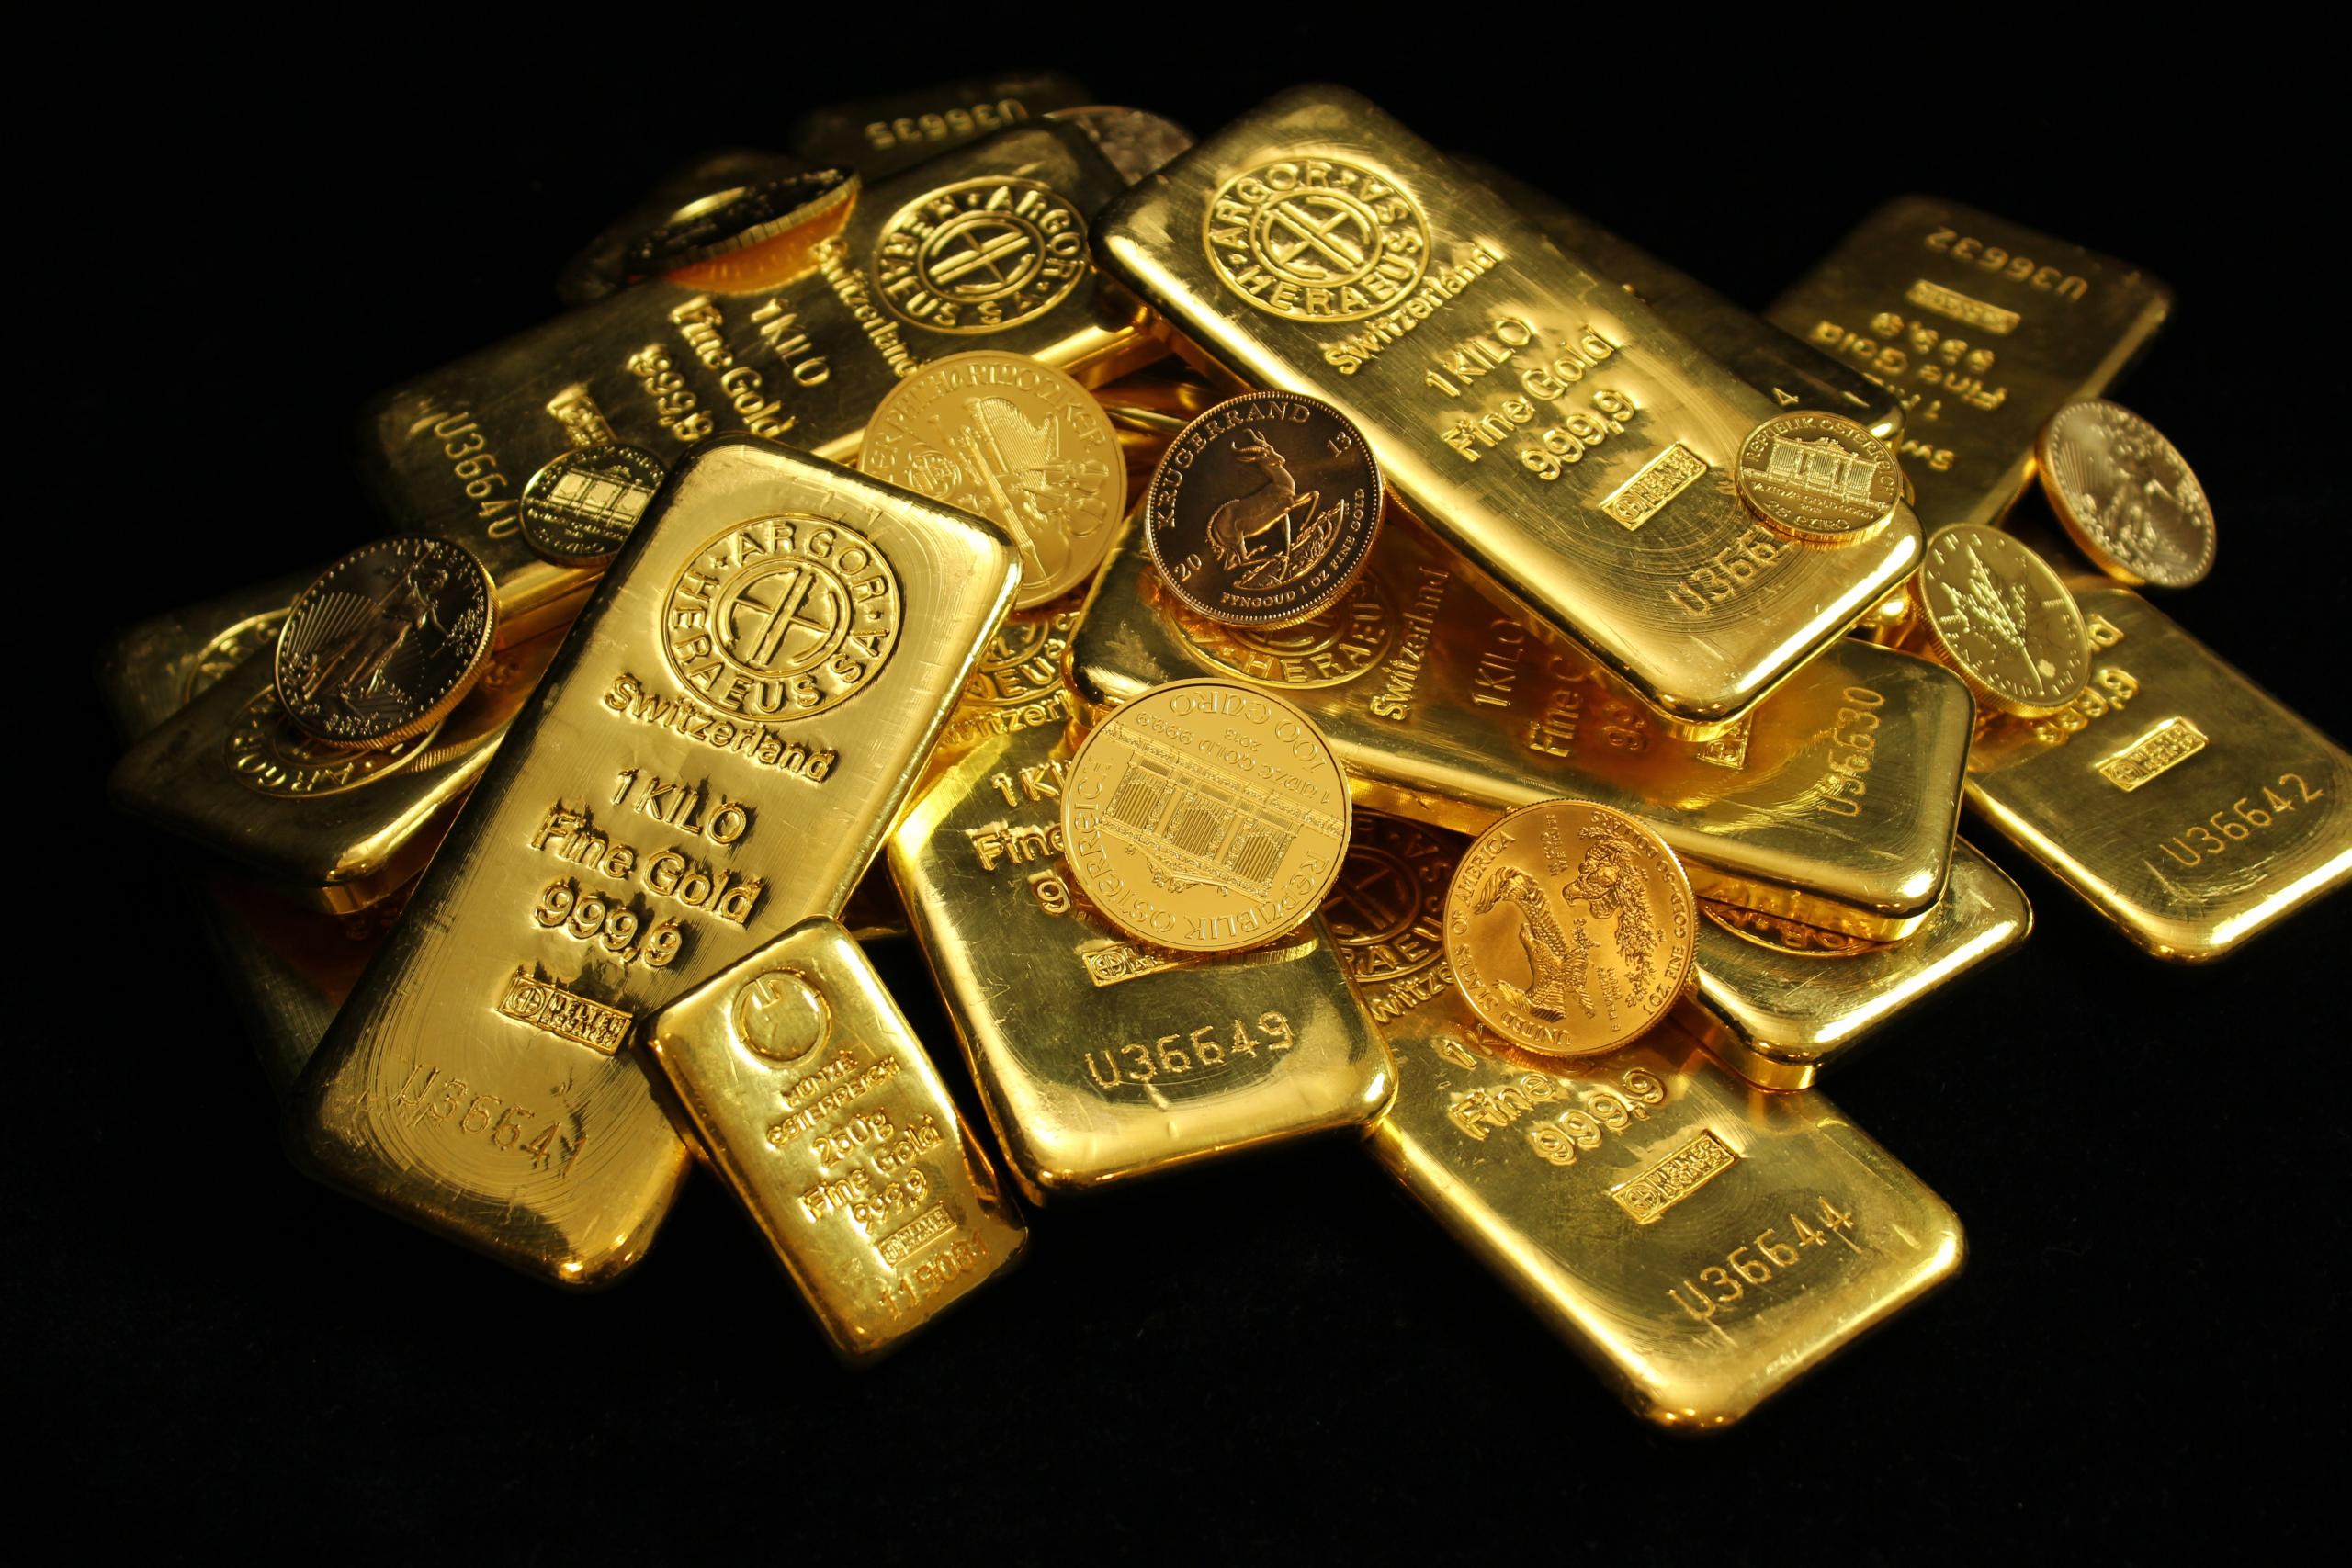 Buy Gold Or Silver In Texas To Protect Your Retirement Nest Egg In 2022